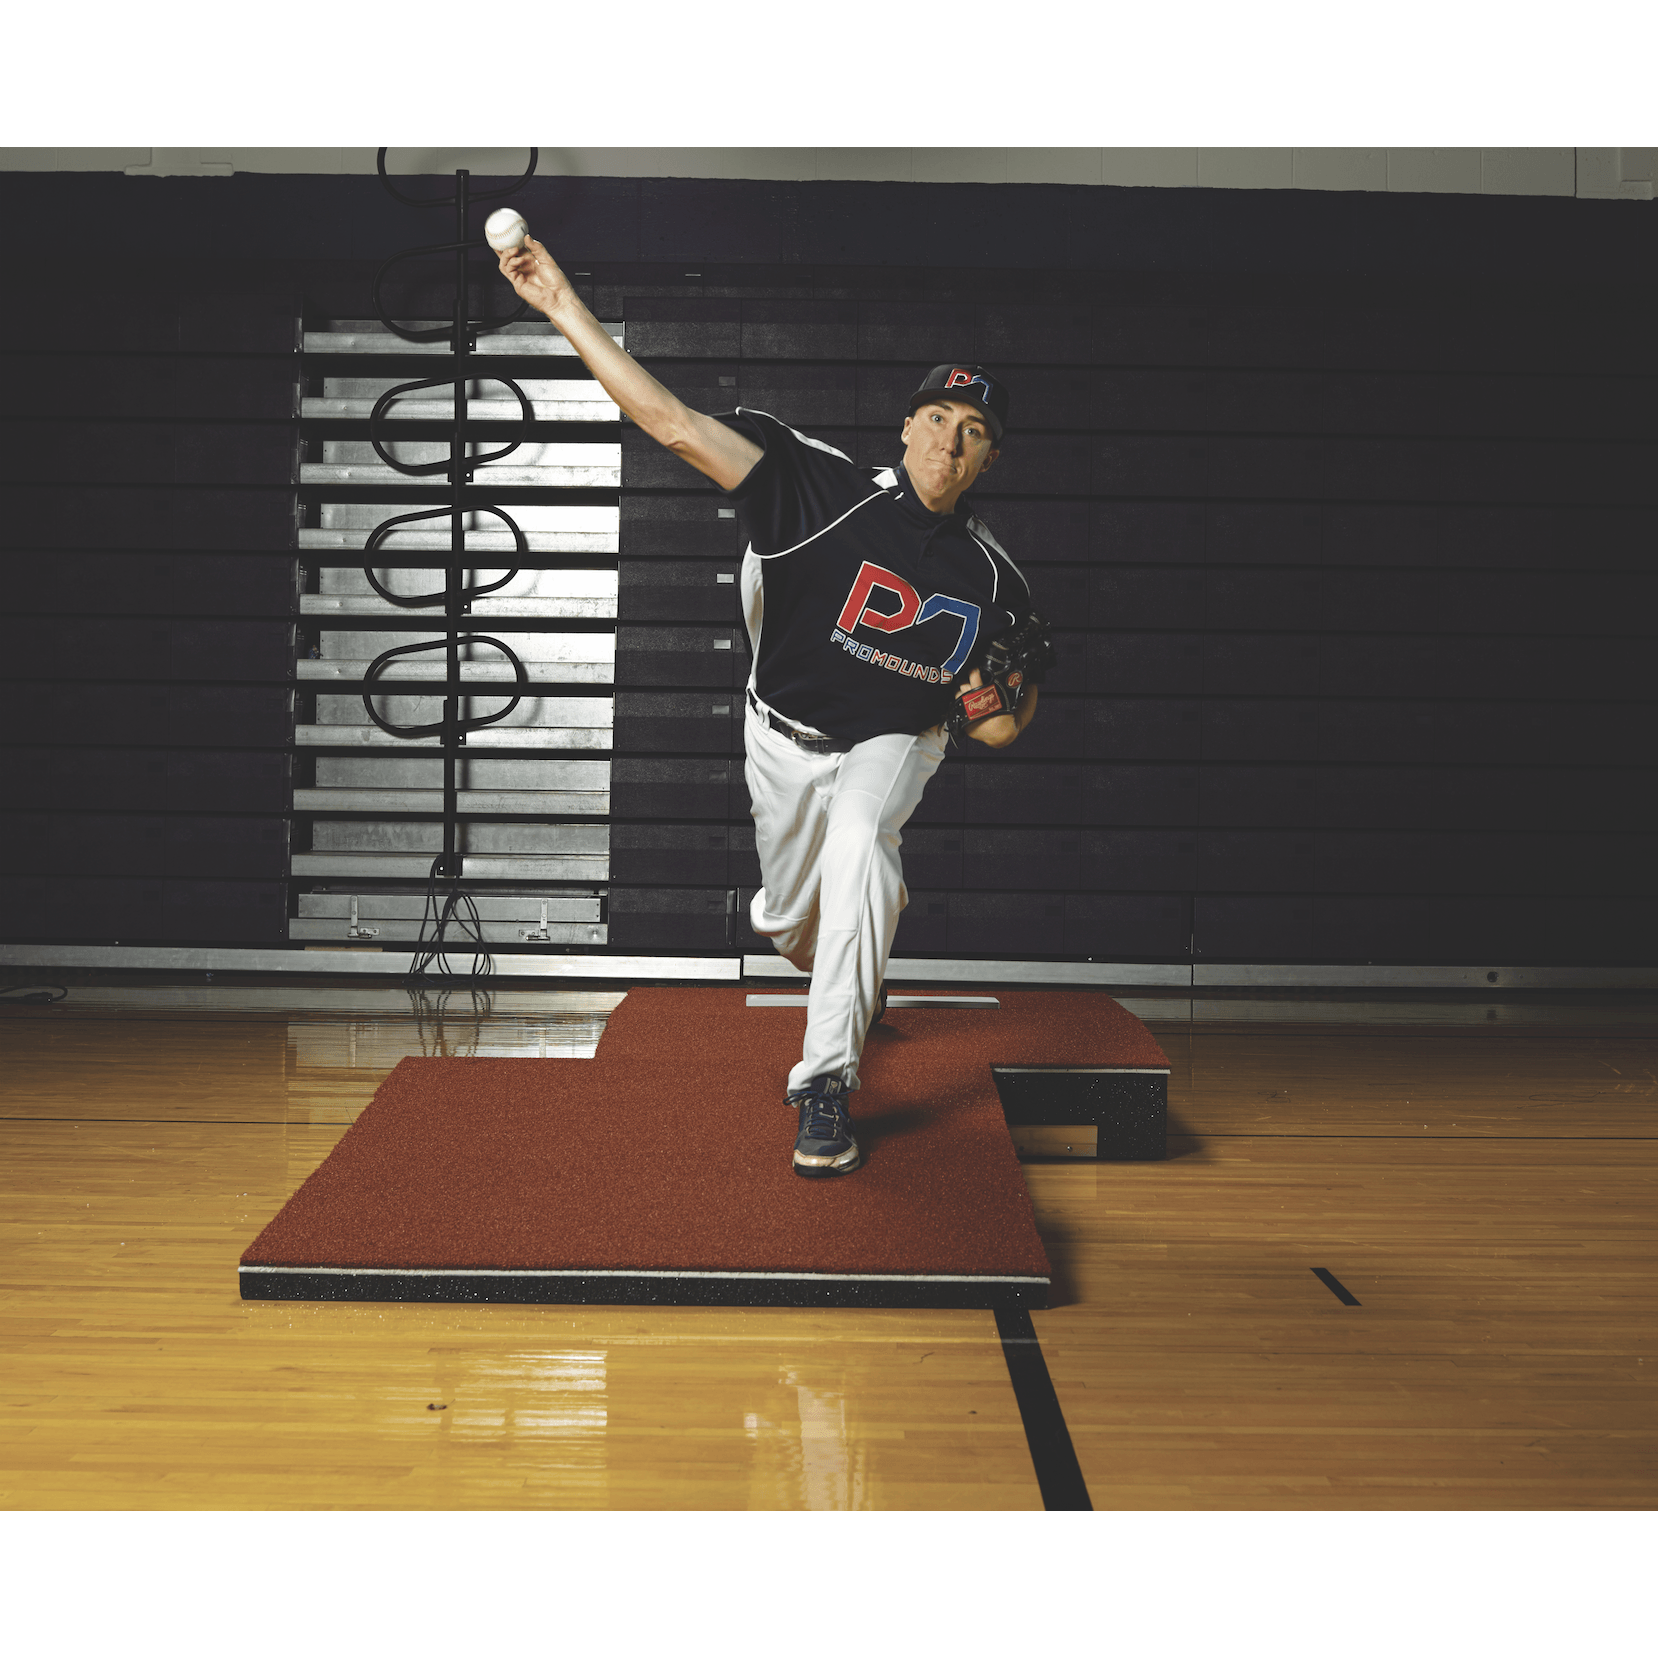 ProMounds Professional Two-Piece Portable Pitching Mound - Pitch Pro Direct